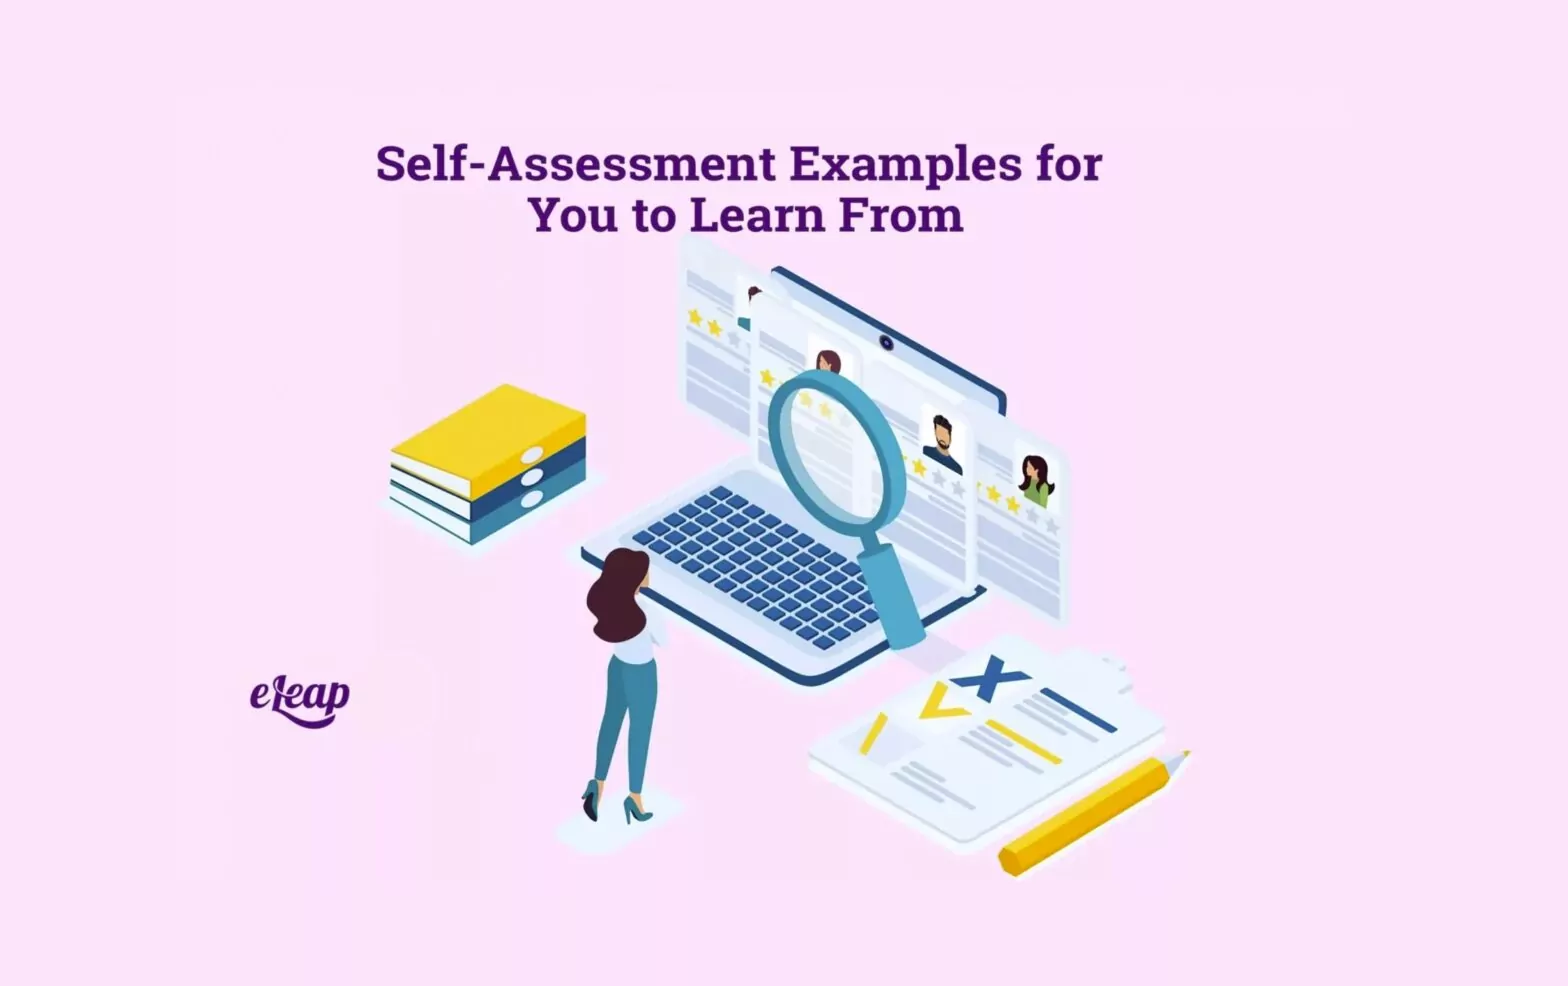 Self-Assessment Examples for You to Learn From